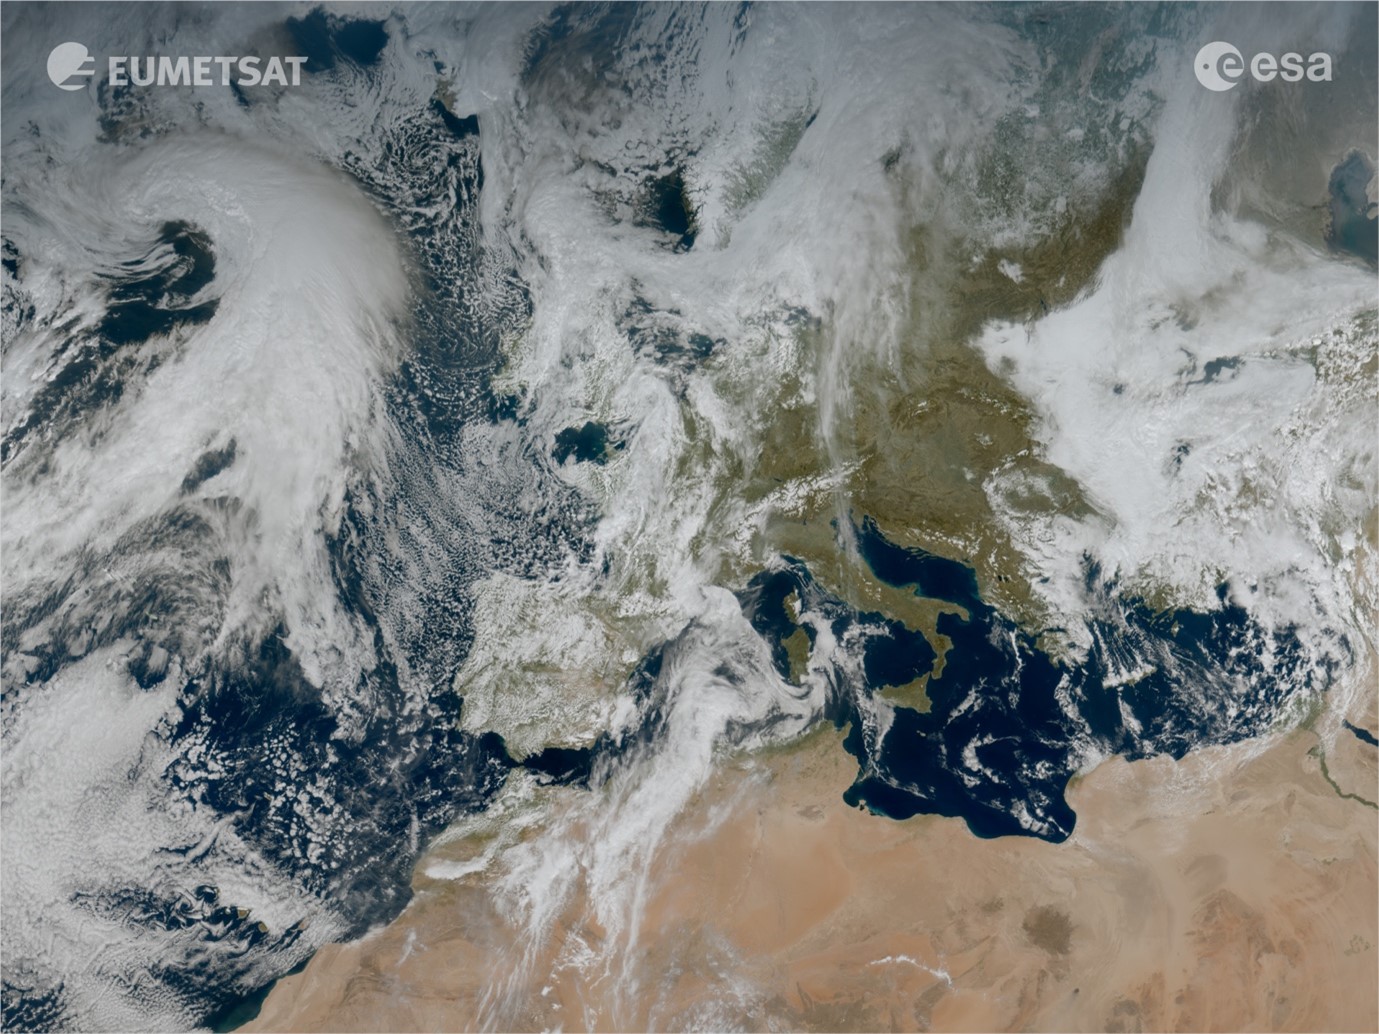 This is a zoomed in view of Europe taken from EUMETSAT’s new Meteosat Third Generation satellite